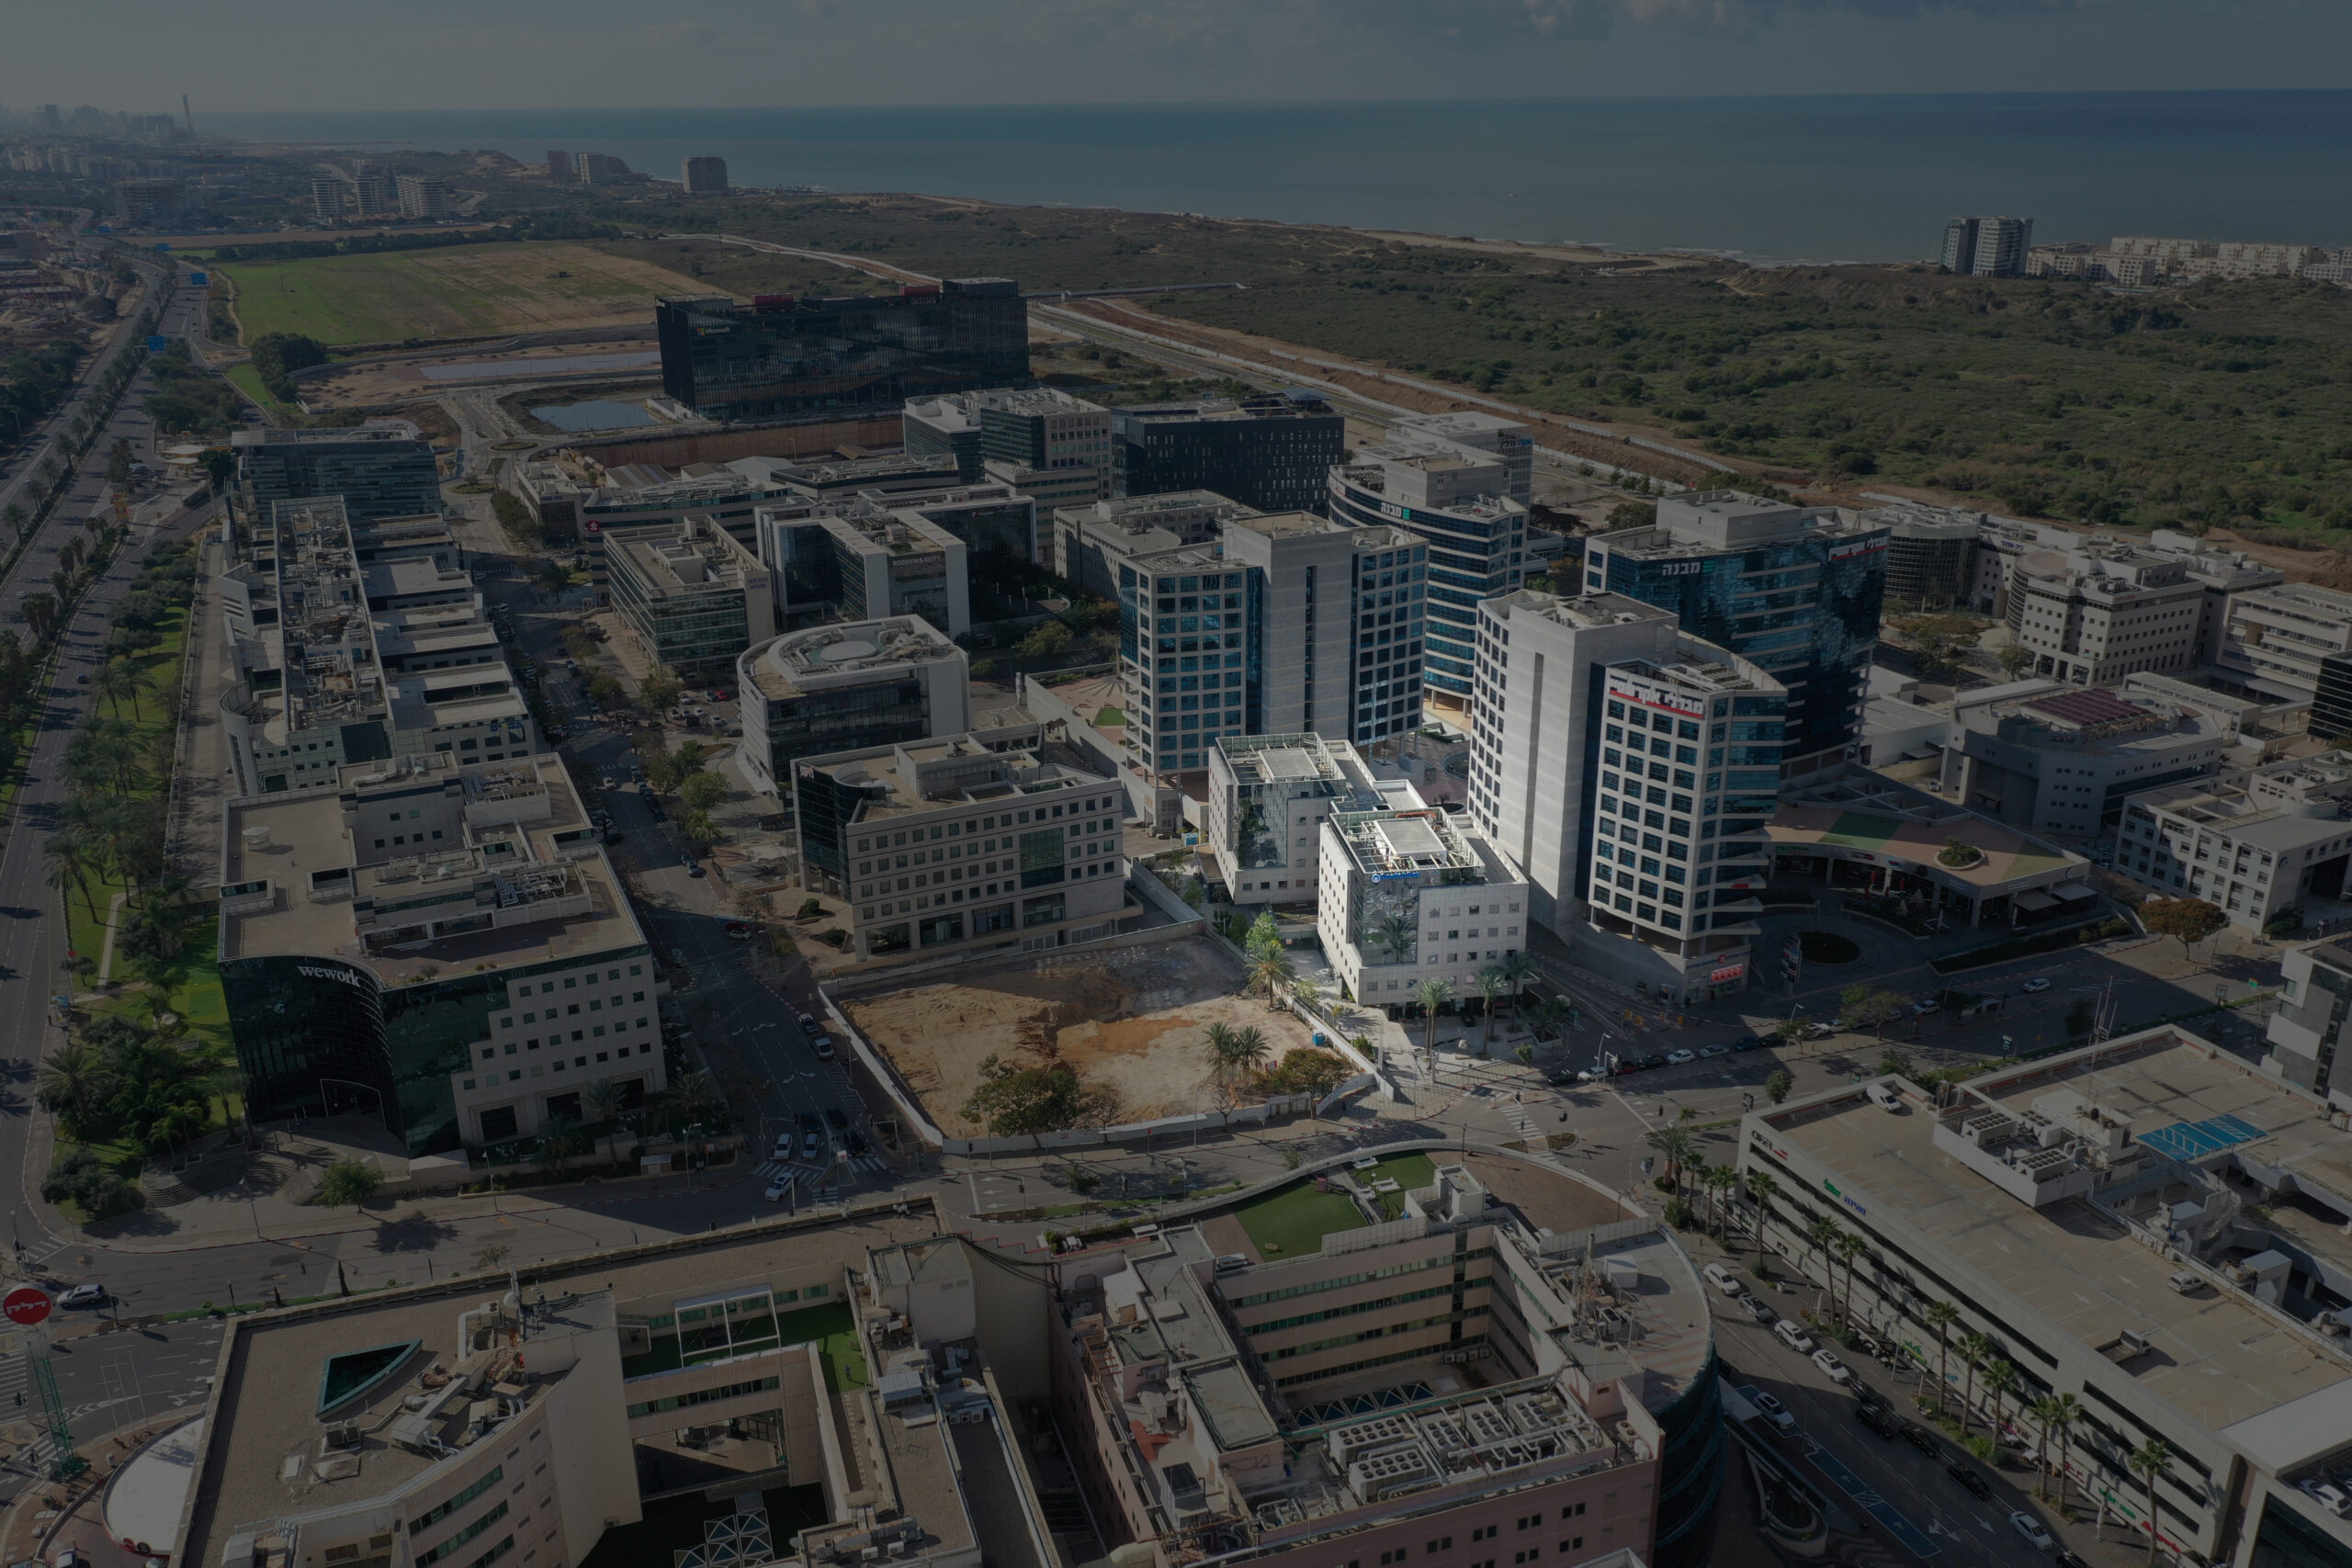 Abba Even: A value-add project in Herzliya’s business district, designated for residential, commercial, offices, and public spaces | Reality the Leading Group of Real Estate Investment Funds in Israel